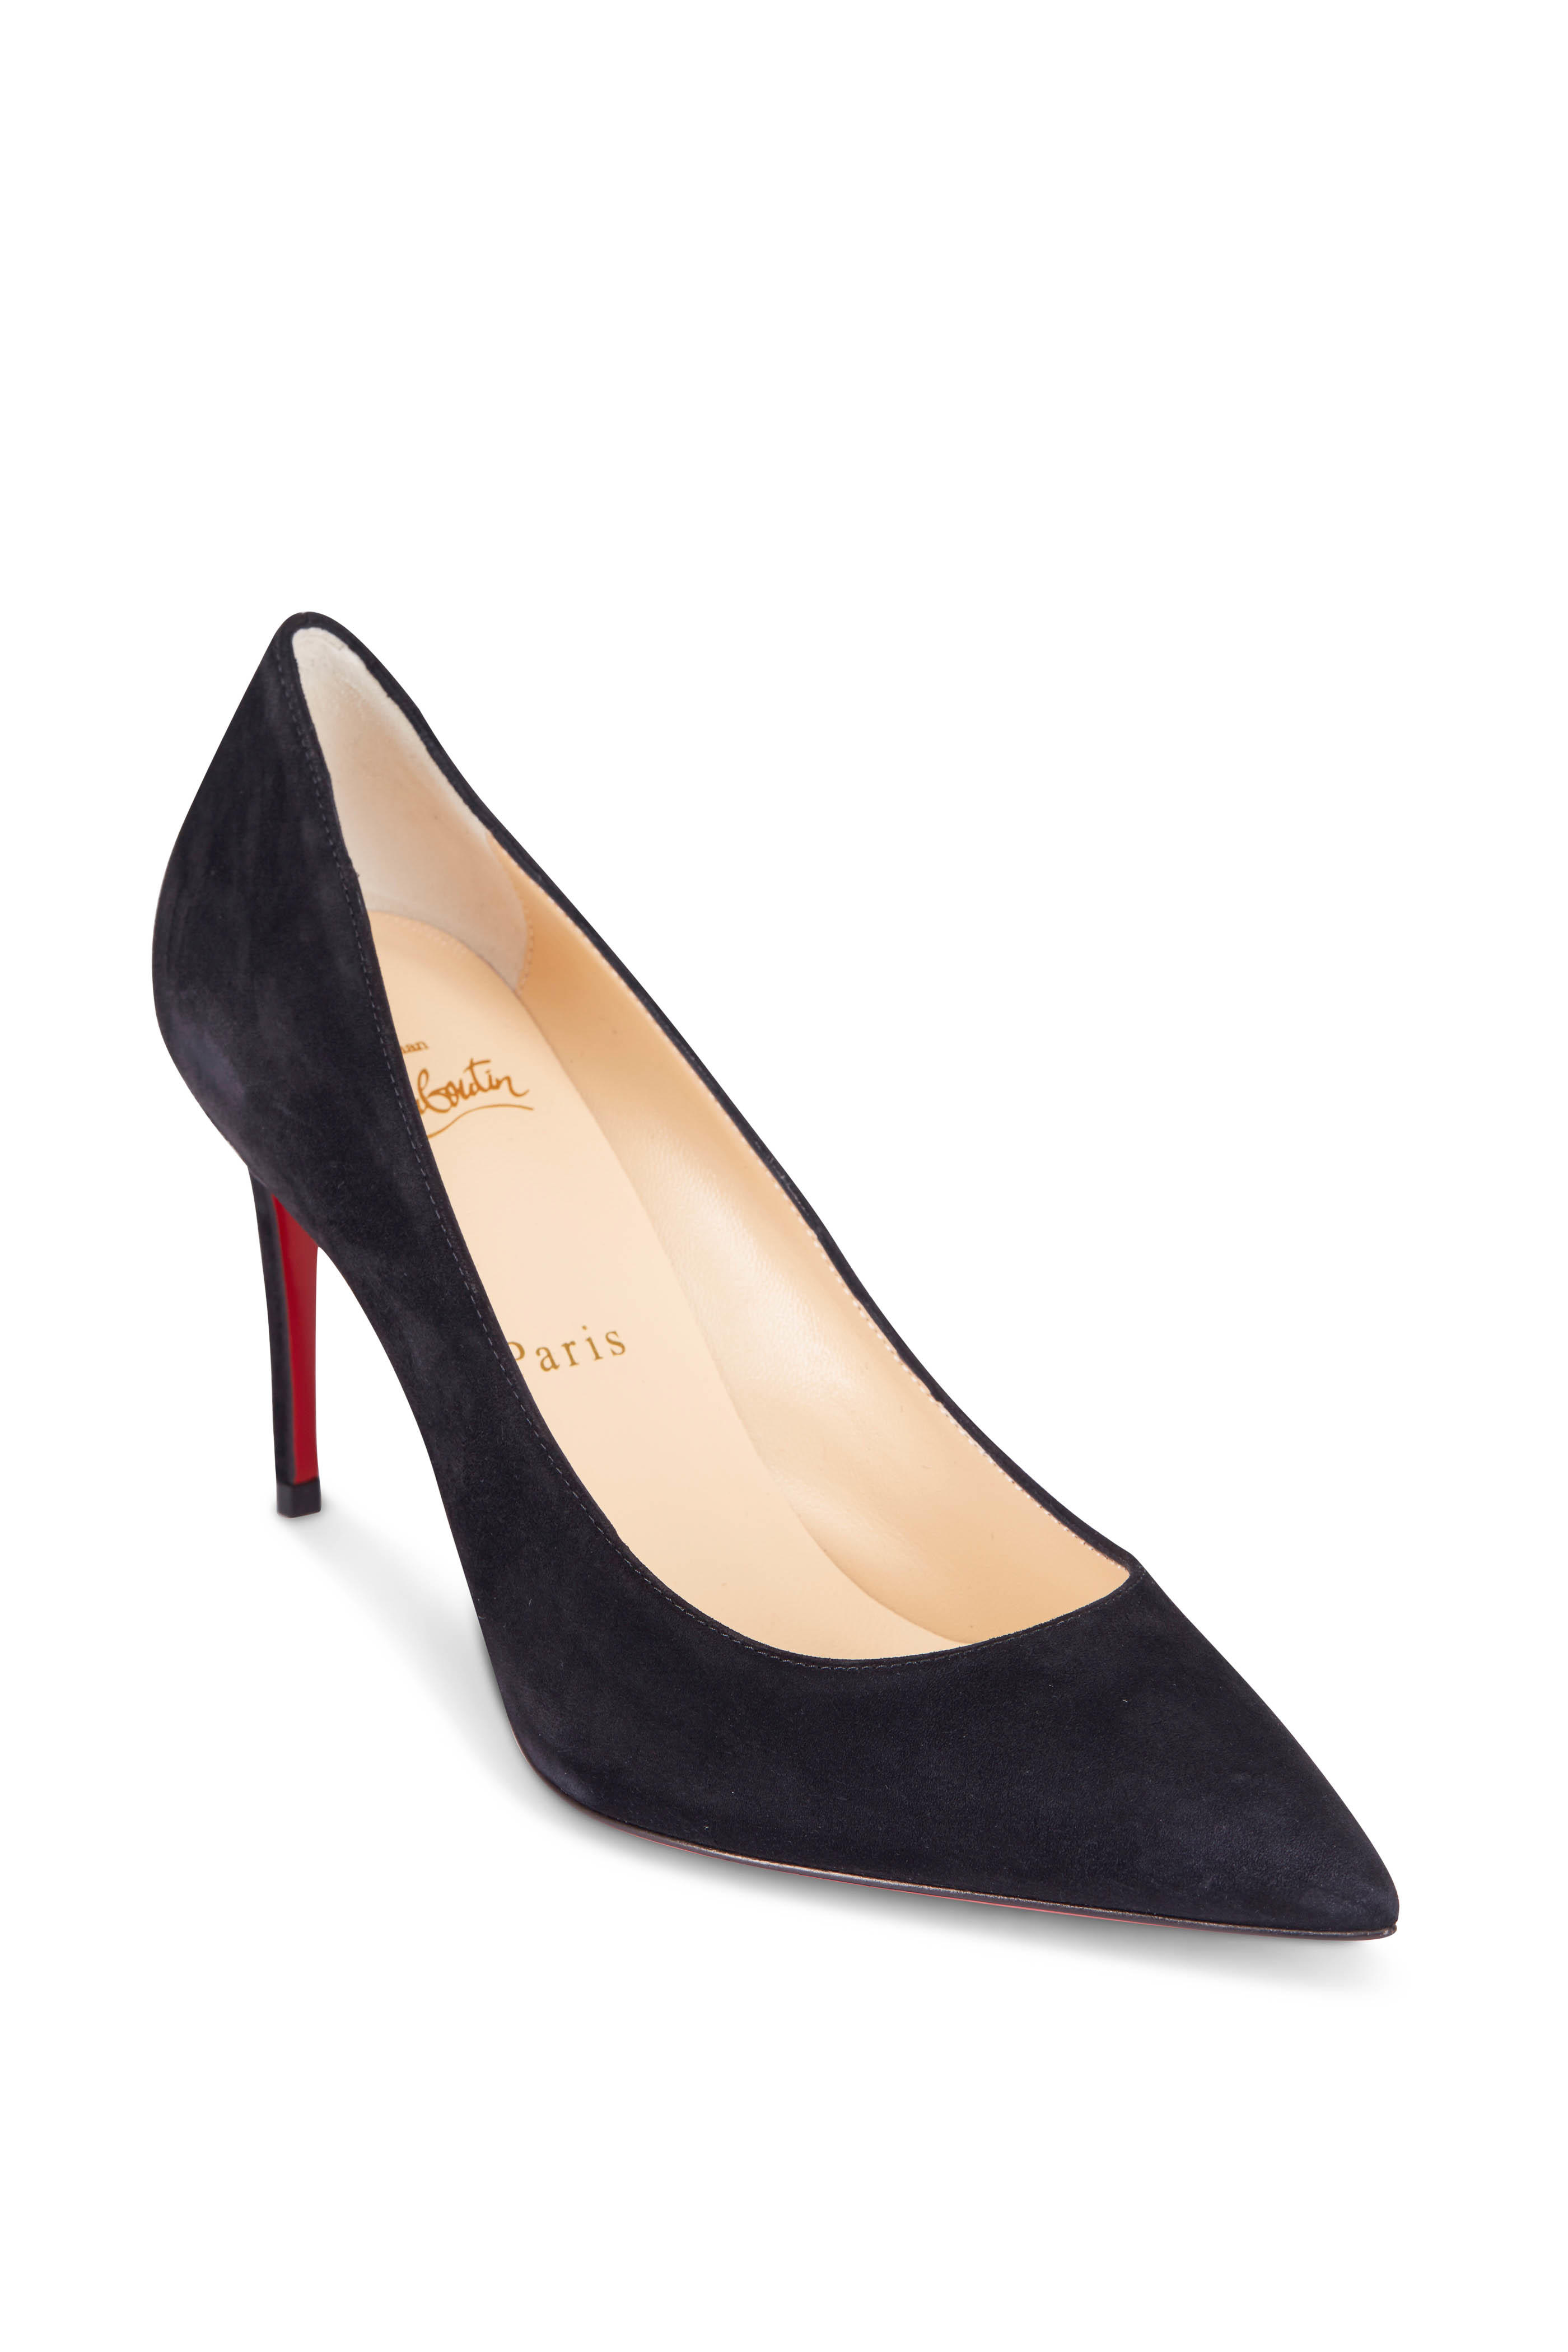 Christian Louboutin Kate Black Suede Pumps, 85MM | Mitchell Stores